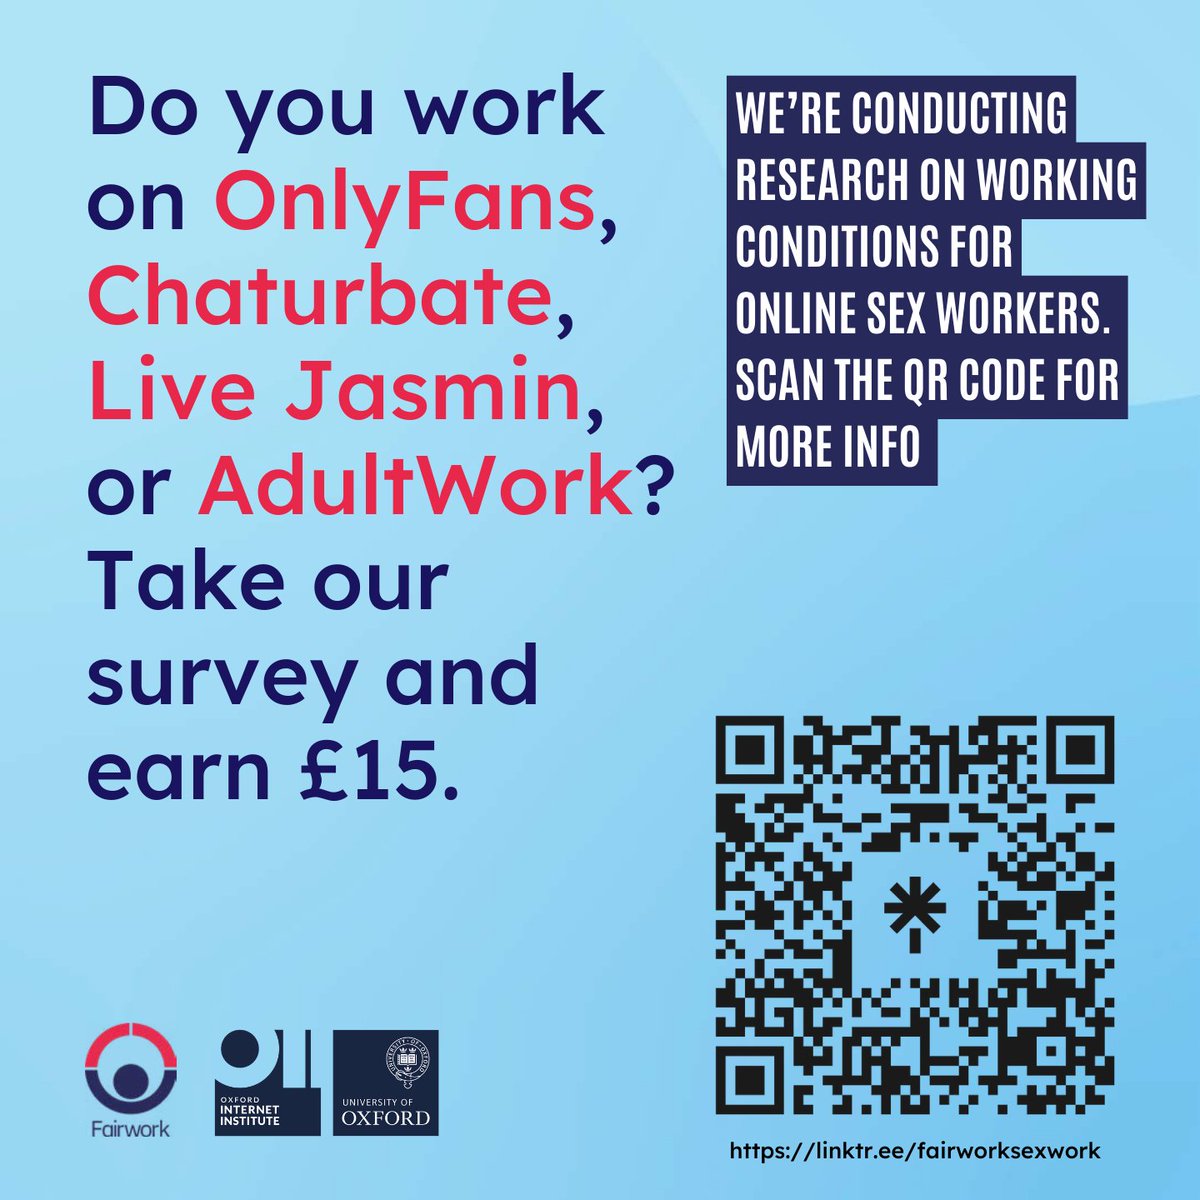 Do you work on #OnlyFans #Chaturbate #LiveJasmin or #AdultWork ? We’re conducting new research on working condition on these platforms and we want to hear from you. Find out more and take our survey here: linktr.ee/fairworksexwork